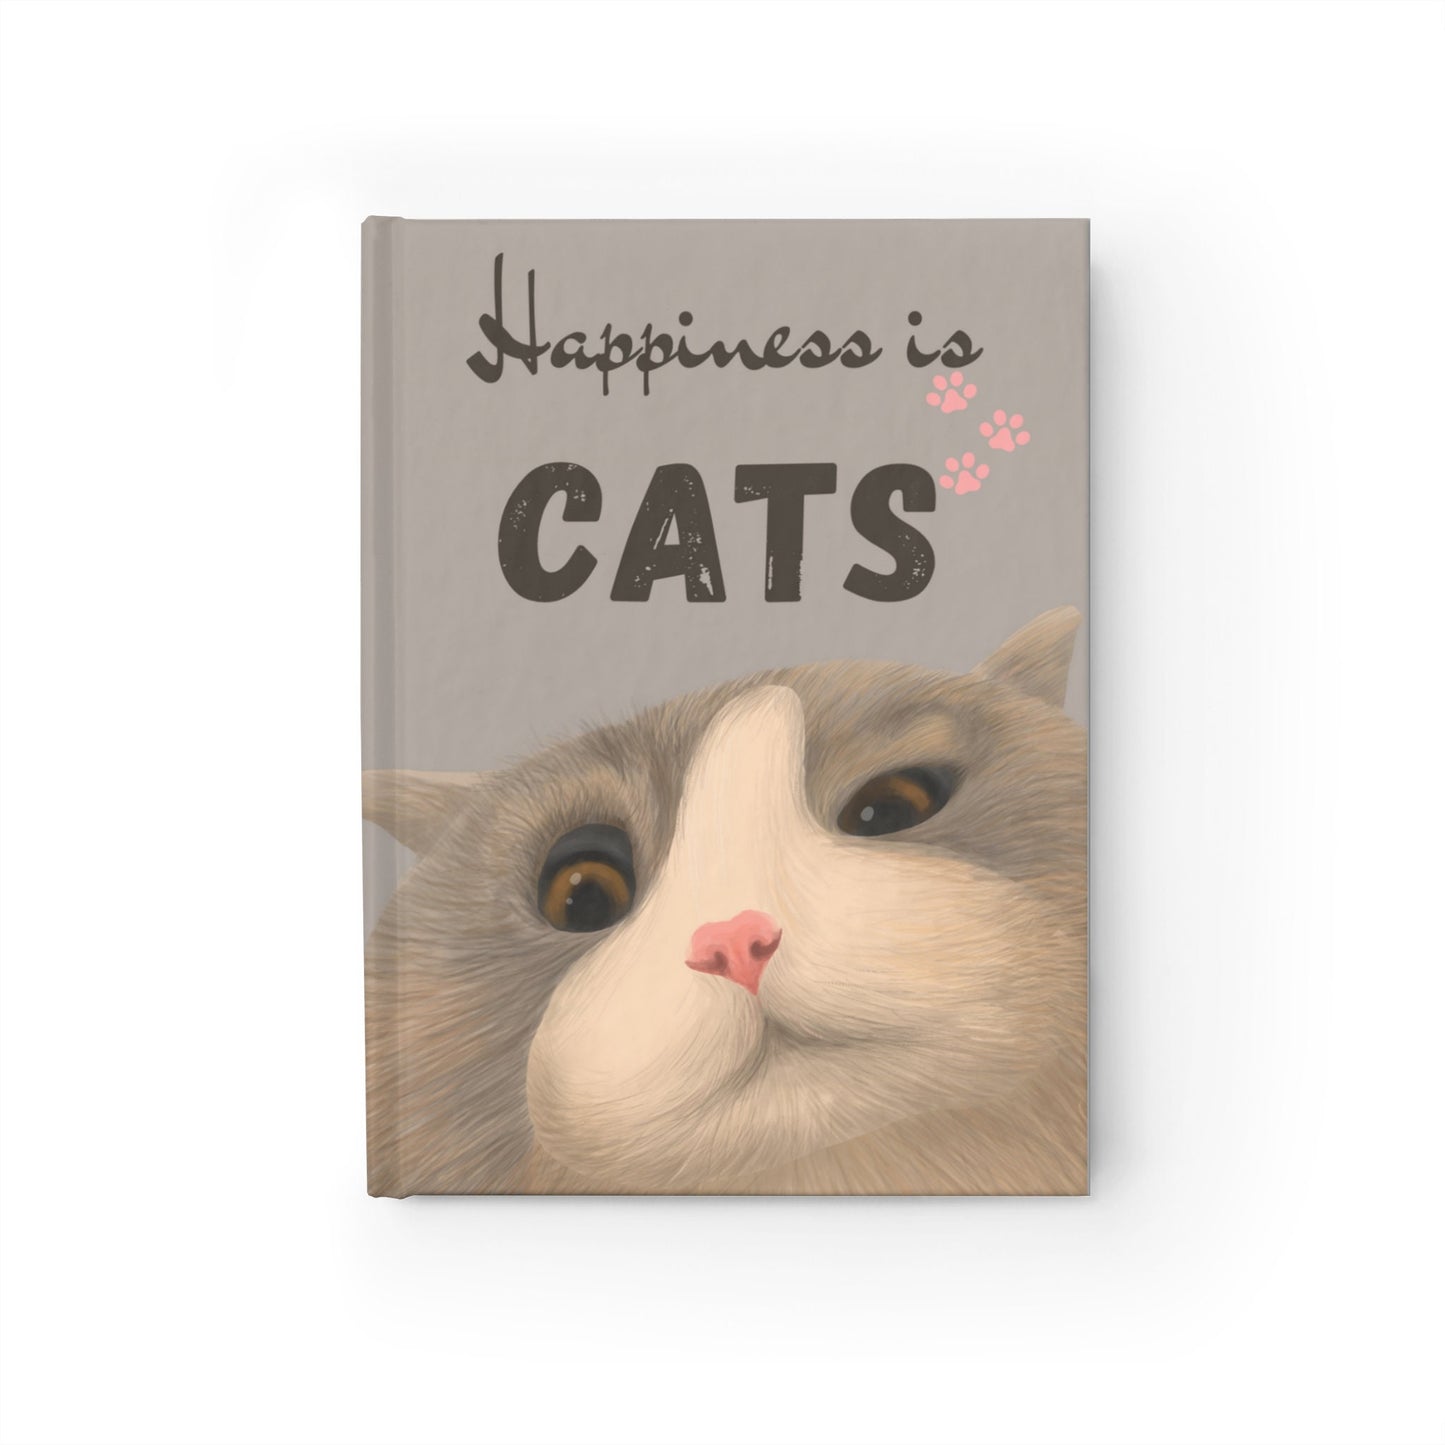 Cat Lovers Journal, Happiness is Cats, Composition Notebook, Gift for Her, Self-Help Diary, Daily Journal, Cat-Themed Planner